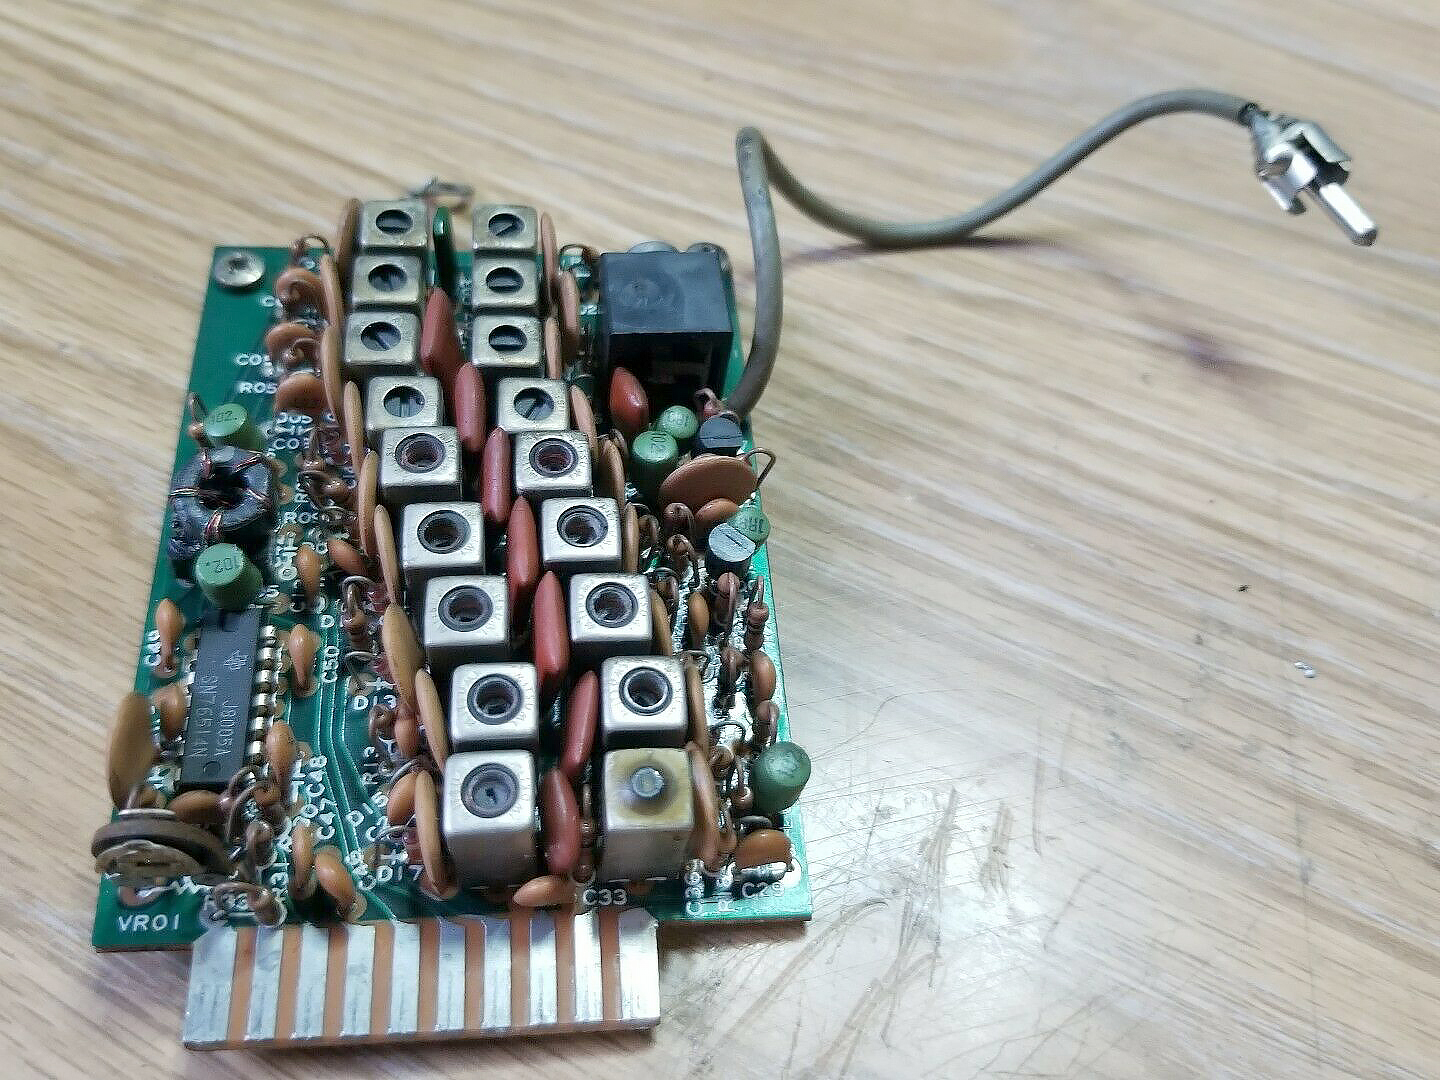 Photo of the PB-2162A Pre Mixer Module used in the Yaesu FT-101ZD Transceiver.